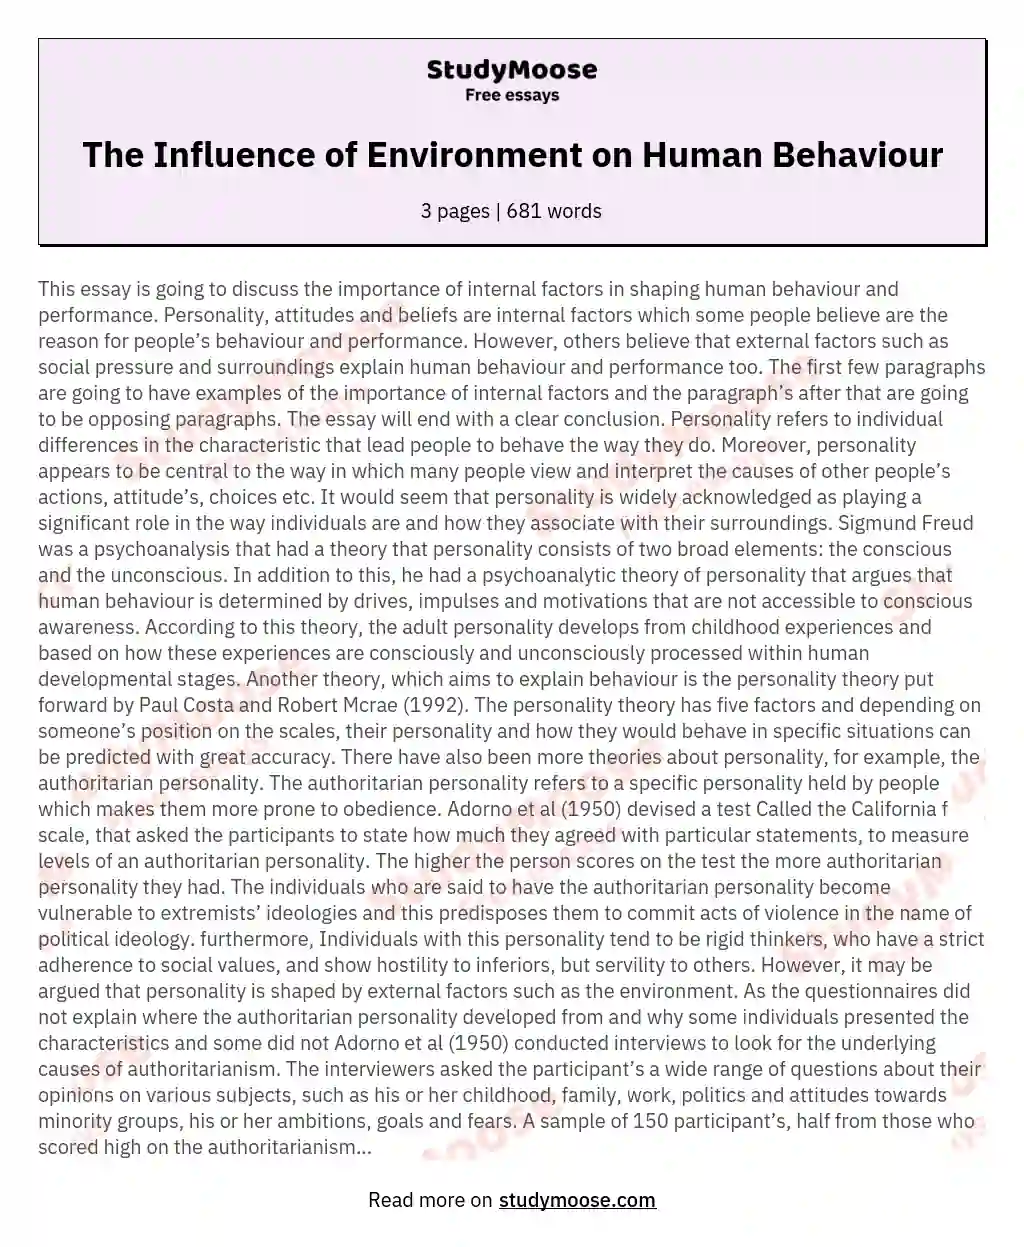 The Influence of Environment on Human Behaviour essay